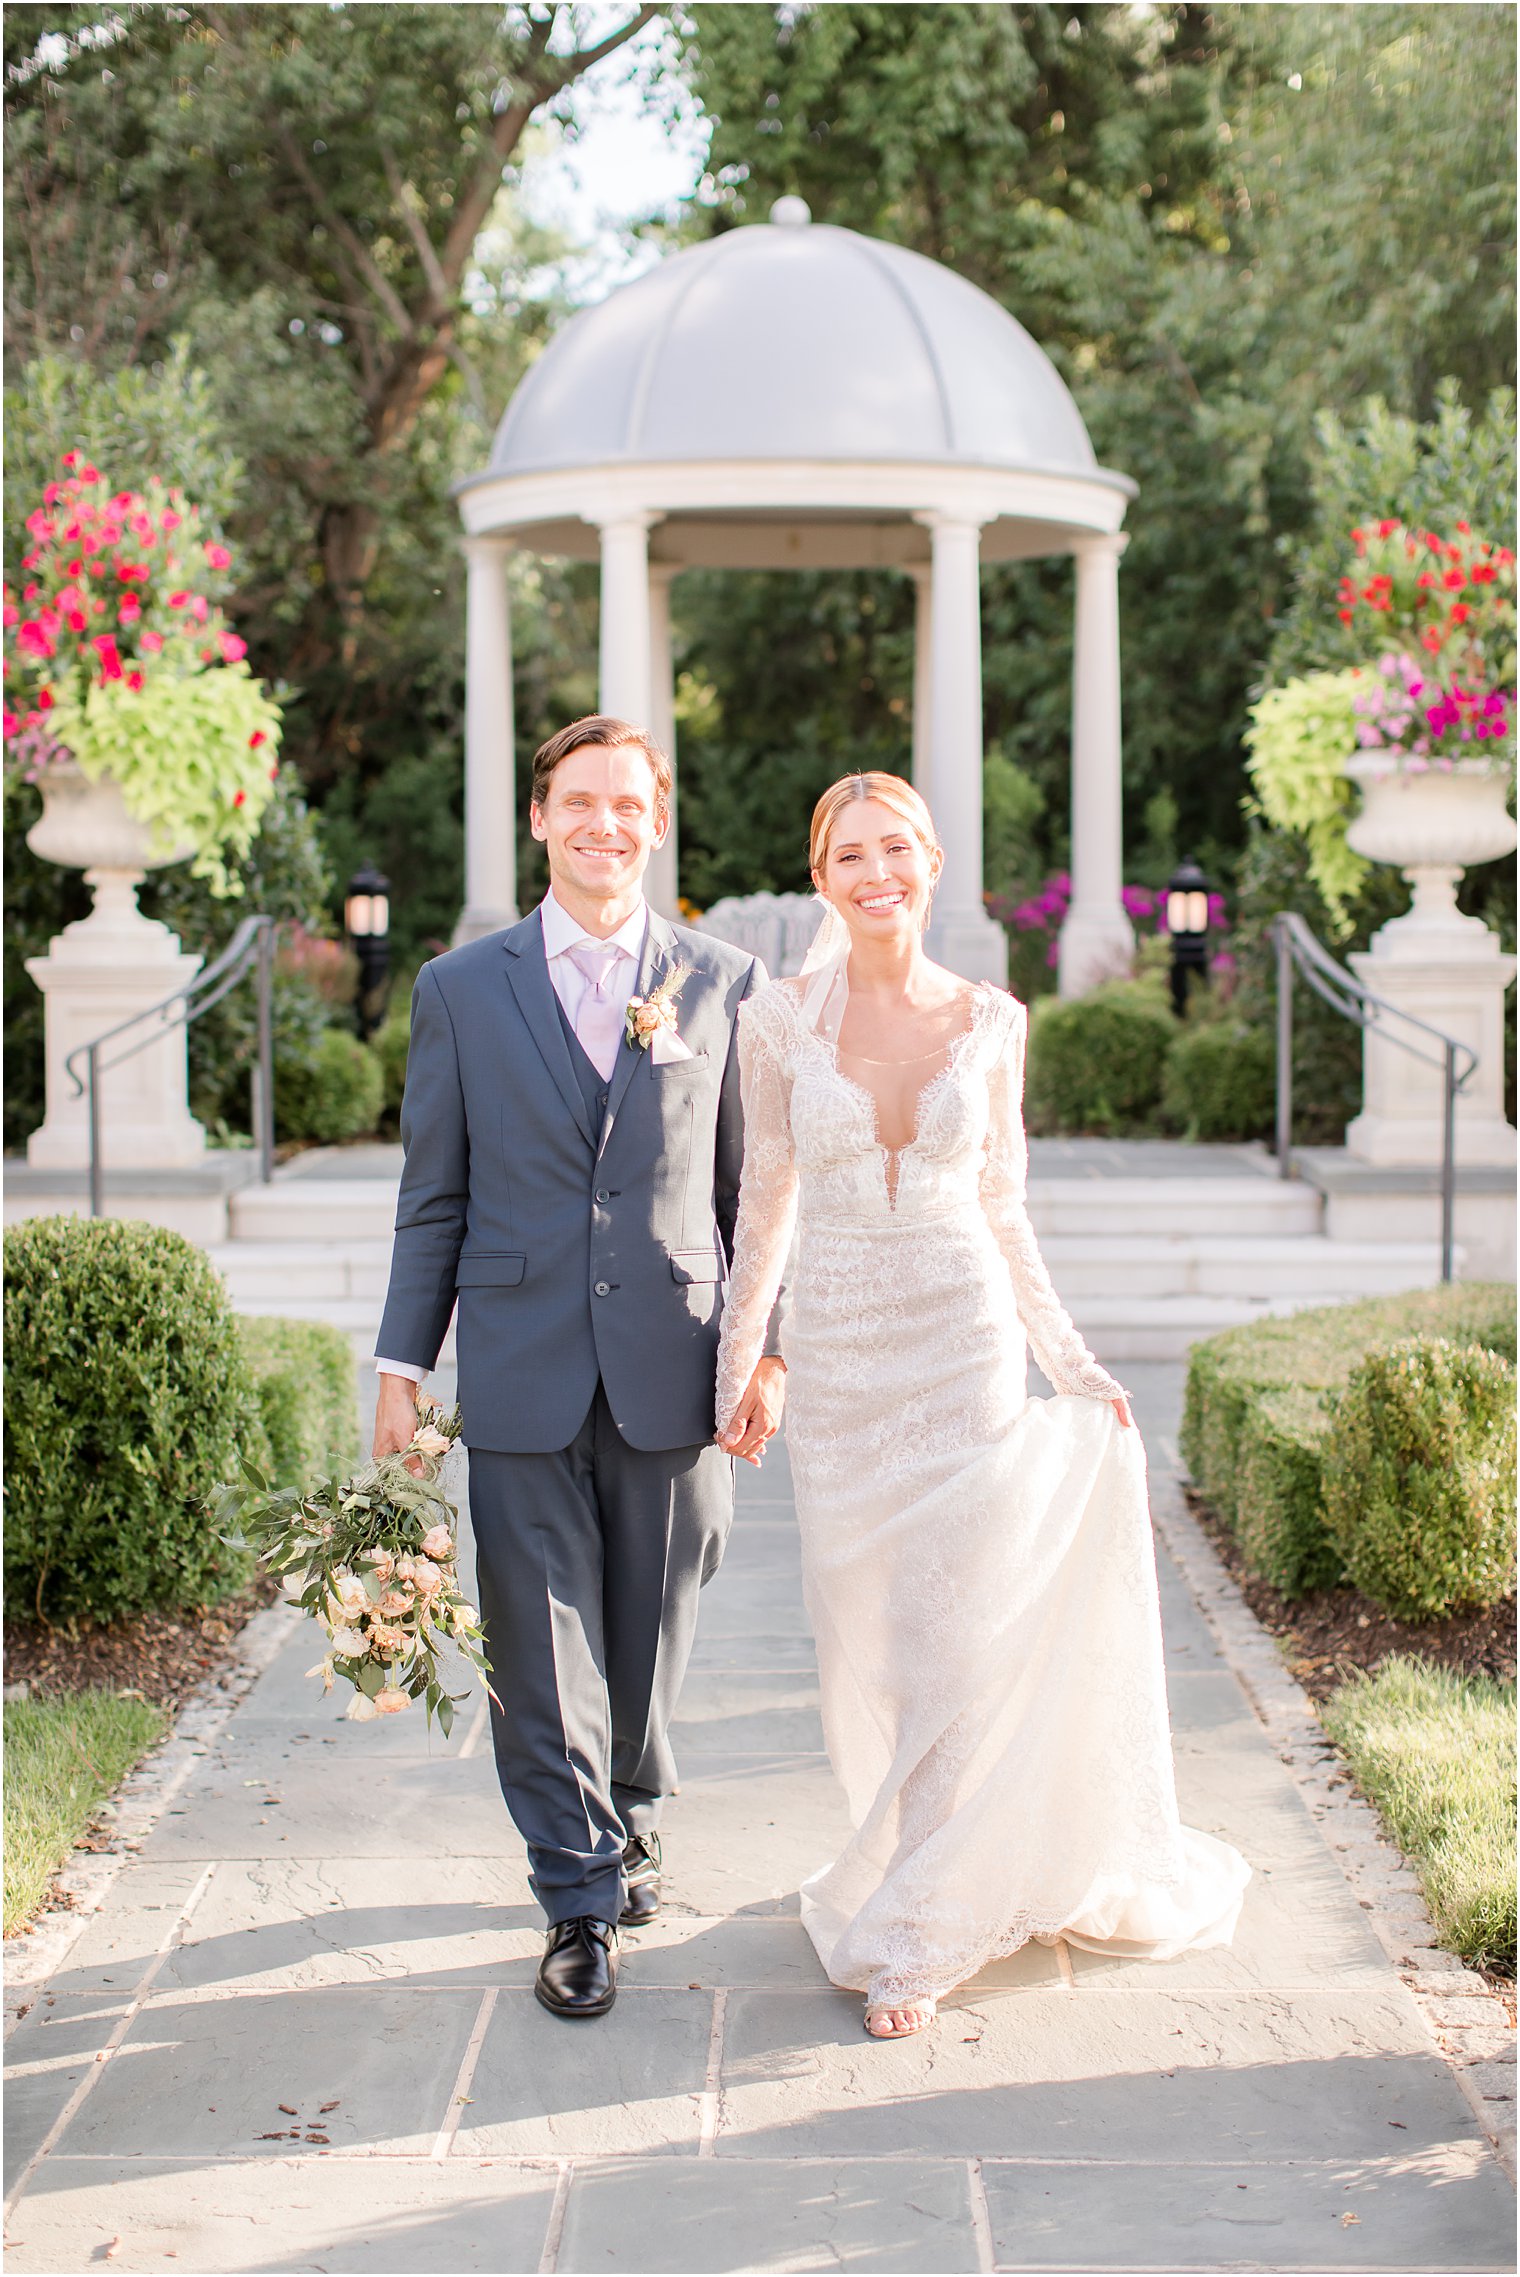 Bride and groom walking at Park Chateau Estate and Gardens in East Brunswick, NJ